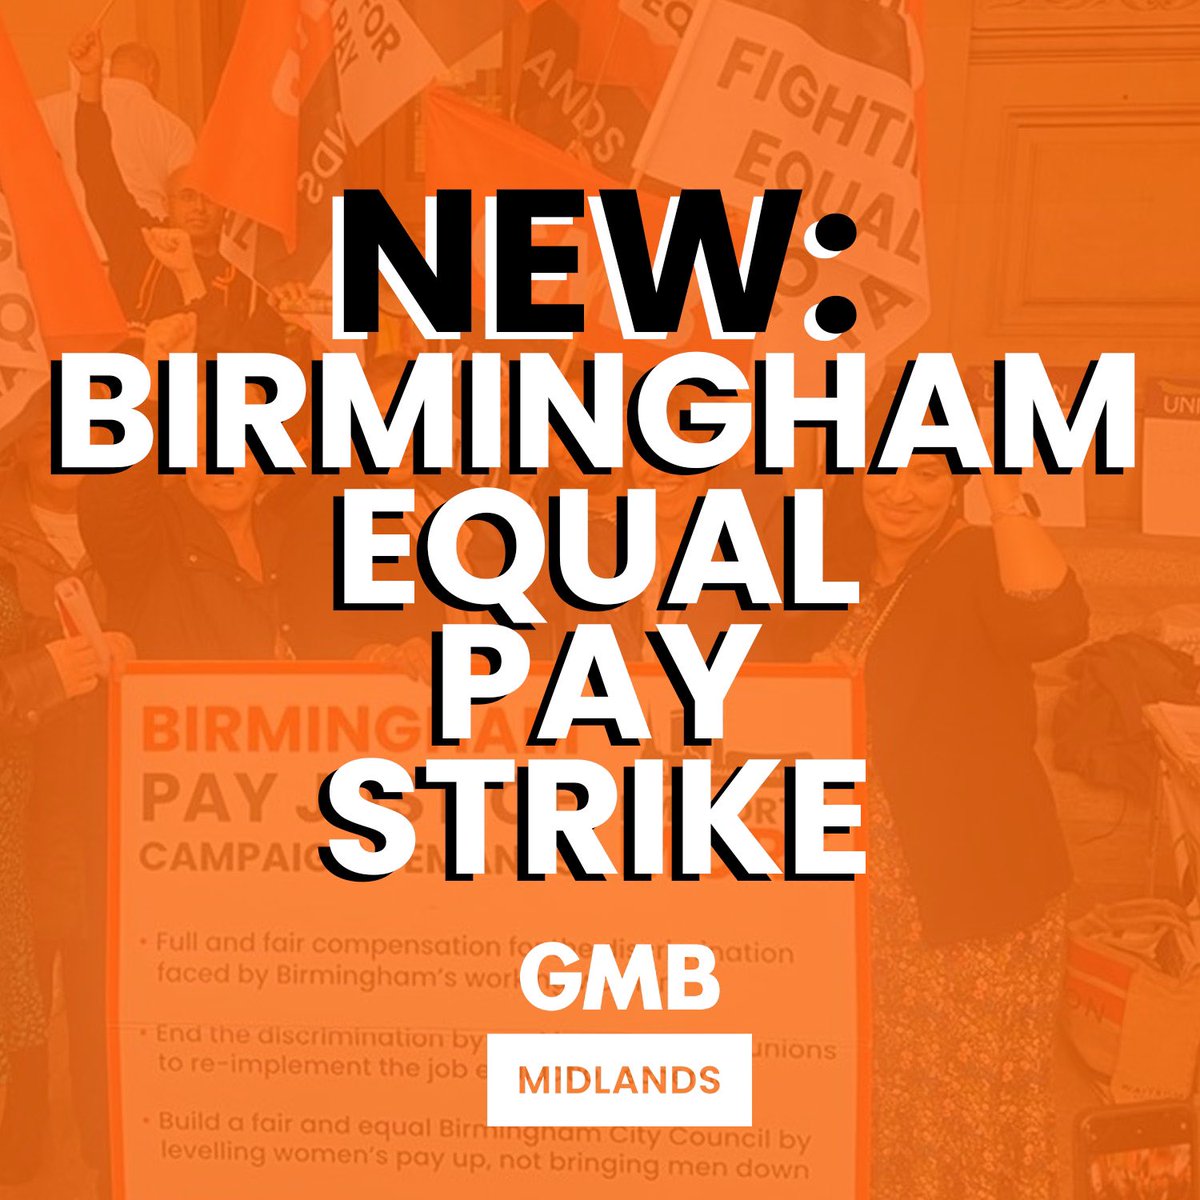 Birmingham City Council workers have overwhelmingly backed industrial action in their campaign to end the equal pay crisis. No more delay - it’s time for Council bosses to return the wages stolen from working women.